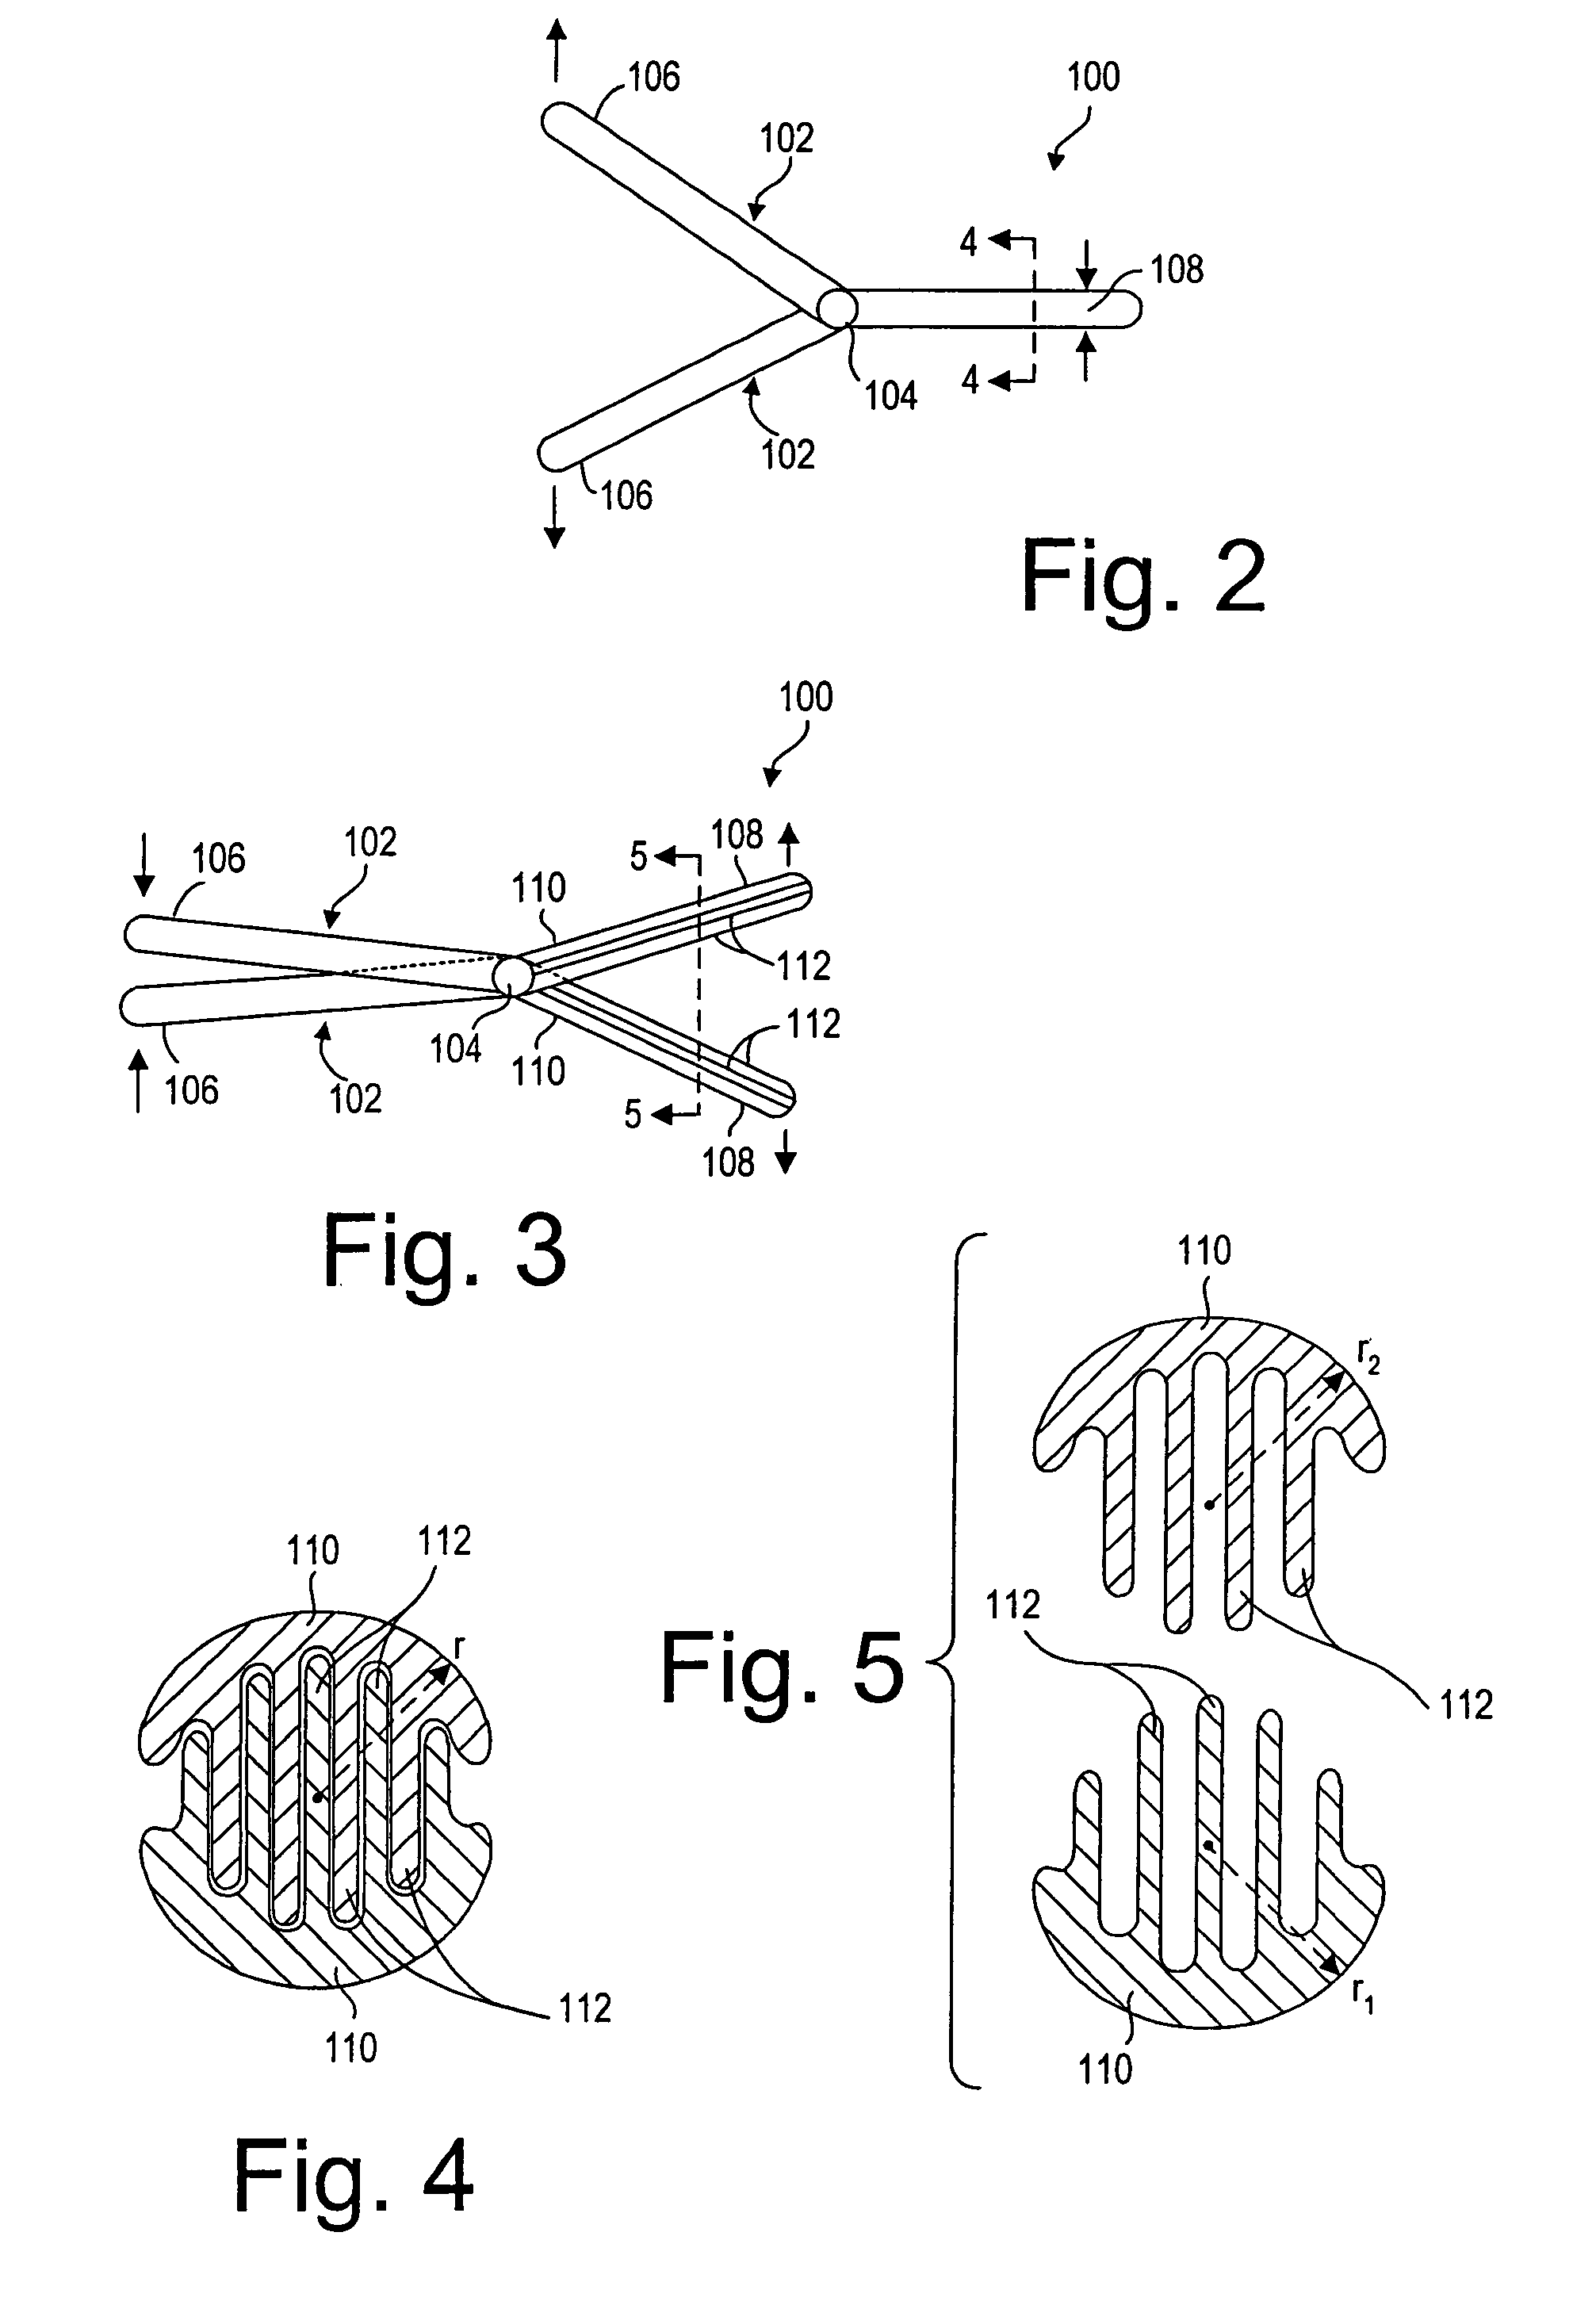 Apparatus and methods for reducing compression bone fractures using high strength ribbed members